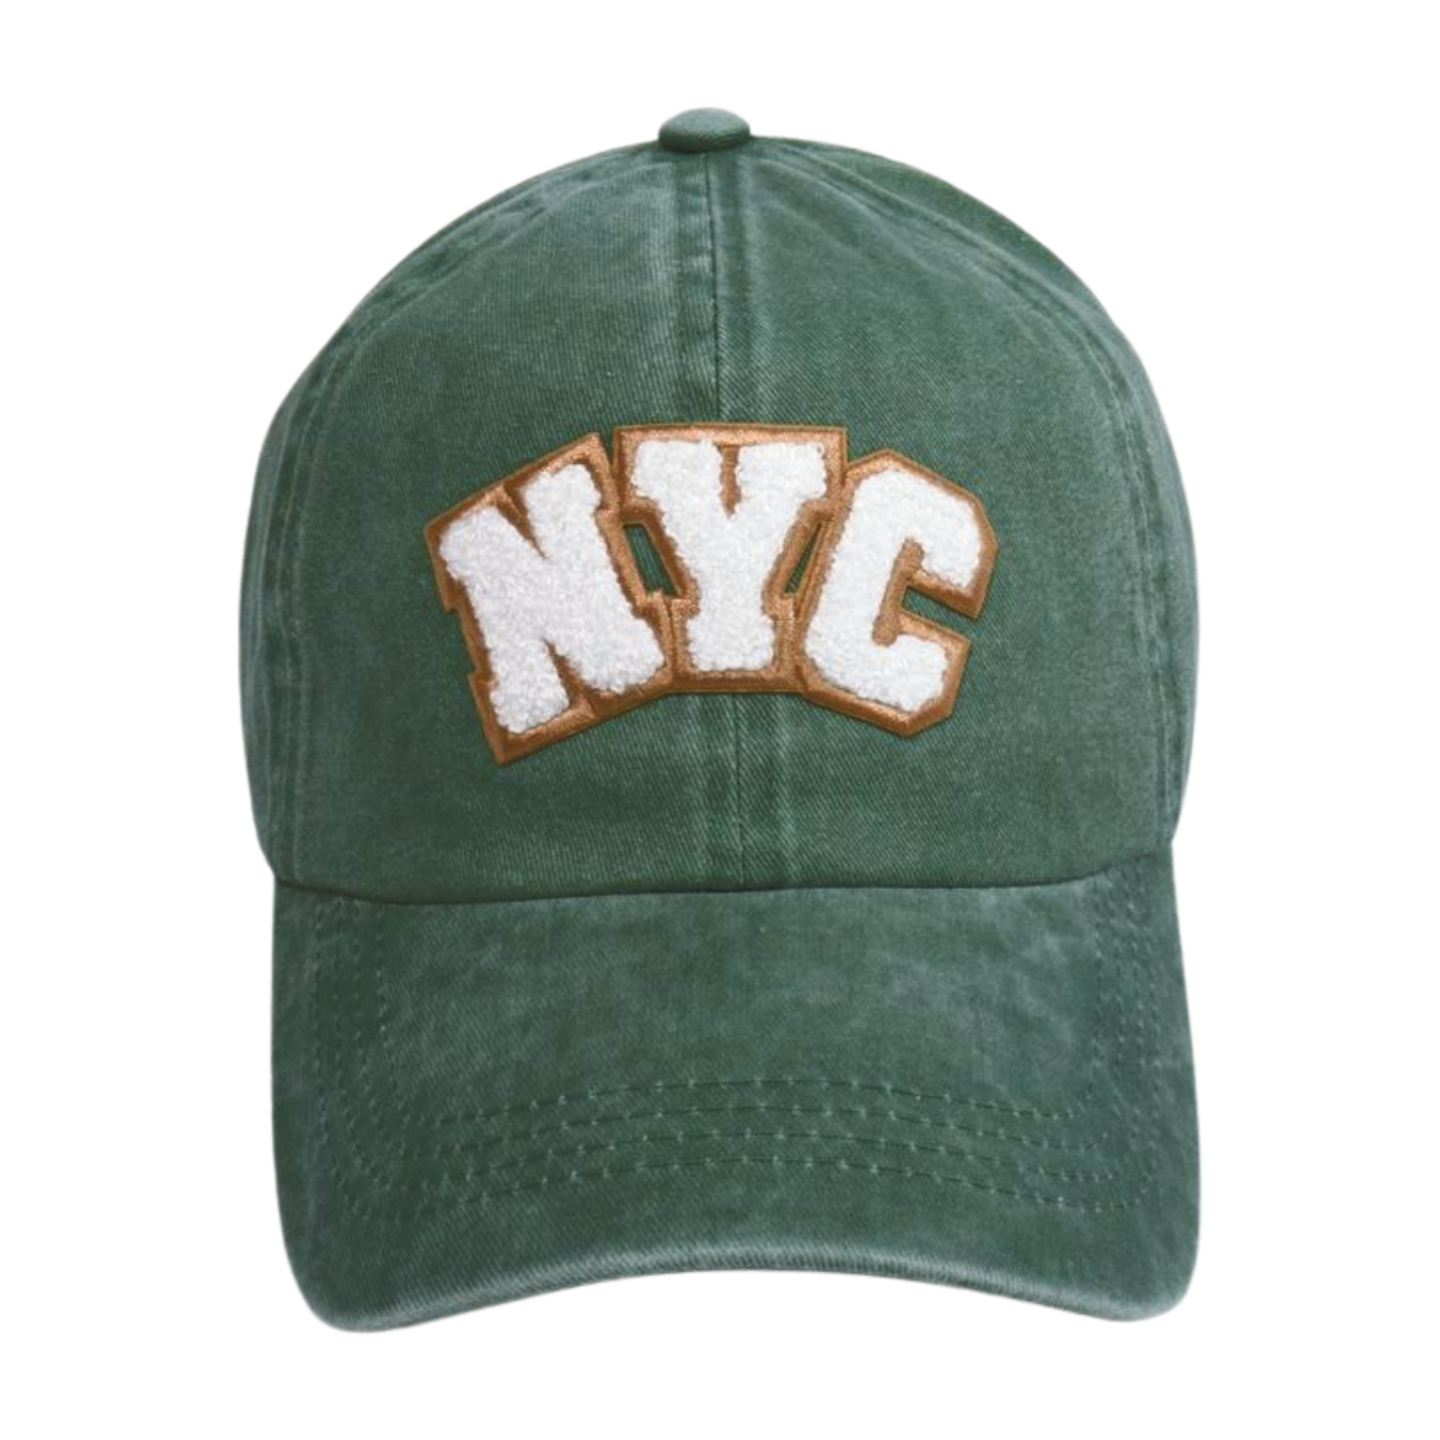 LCAP3412 - NYC CHENILLE PATCH BASEBALL CAP